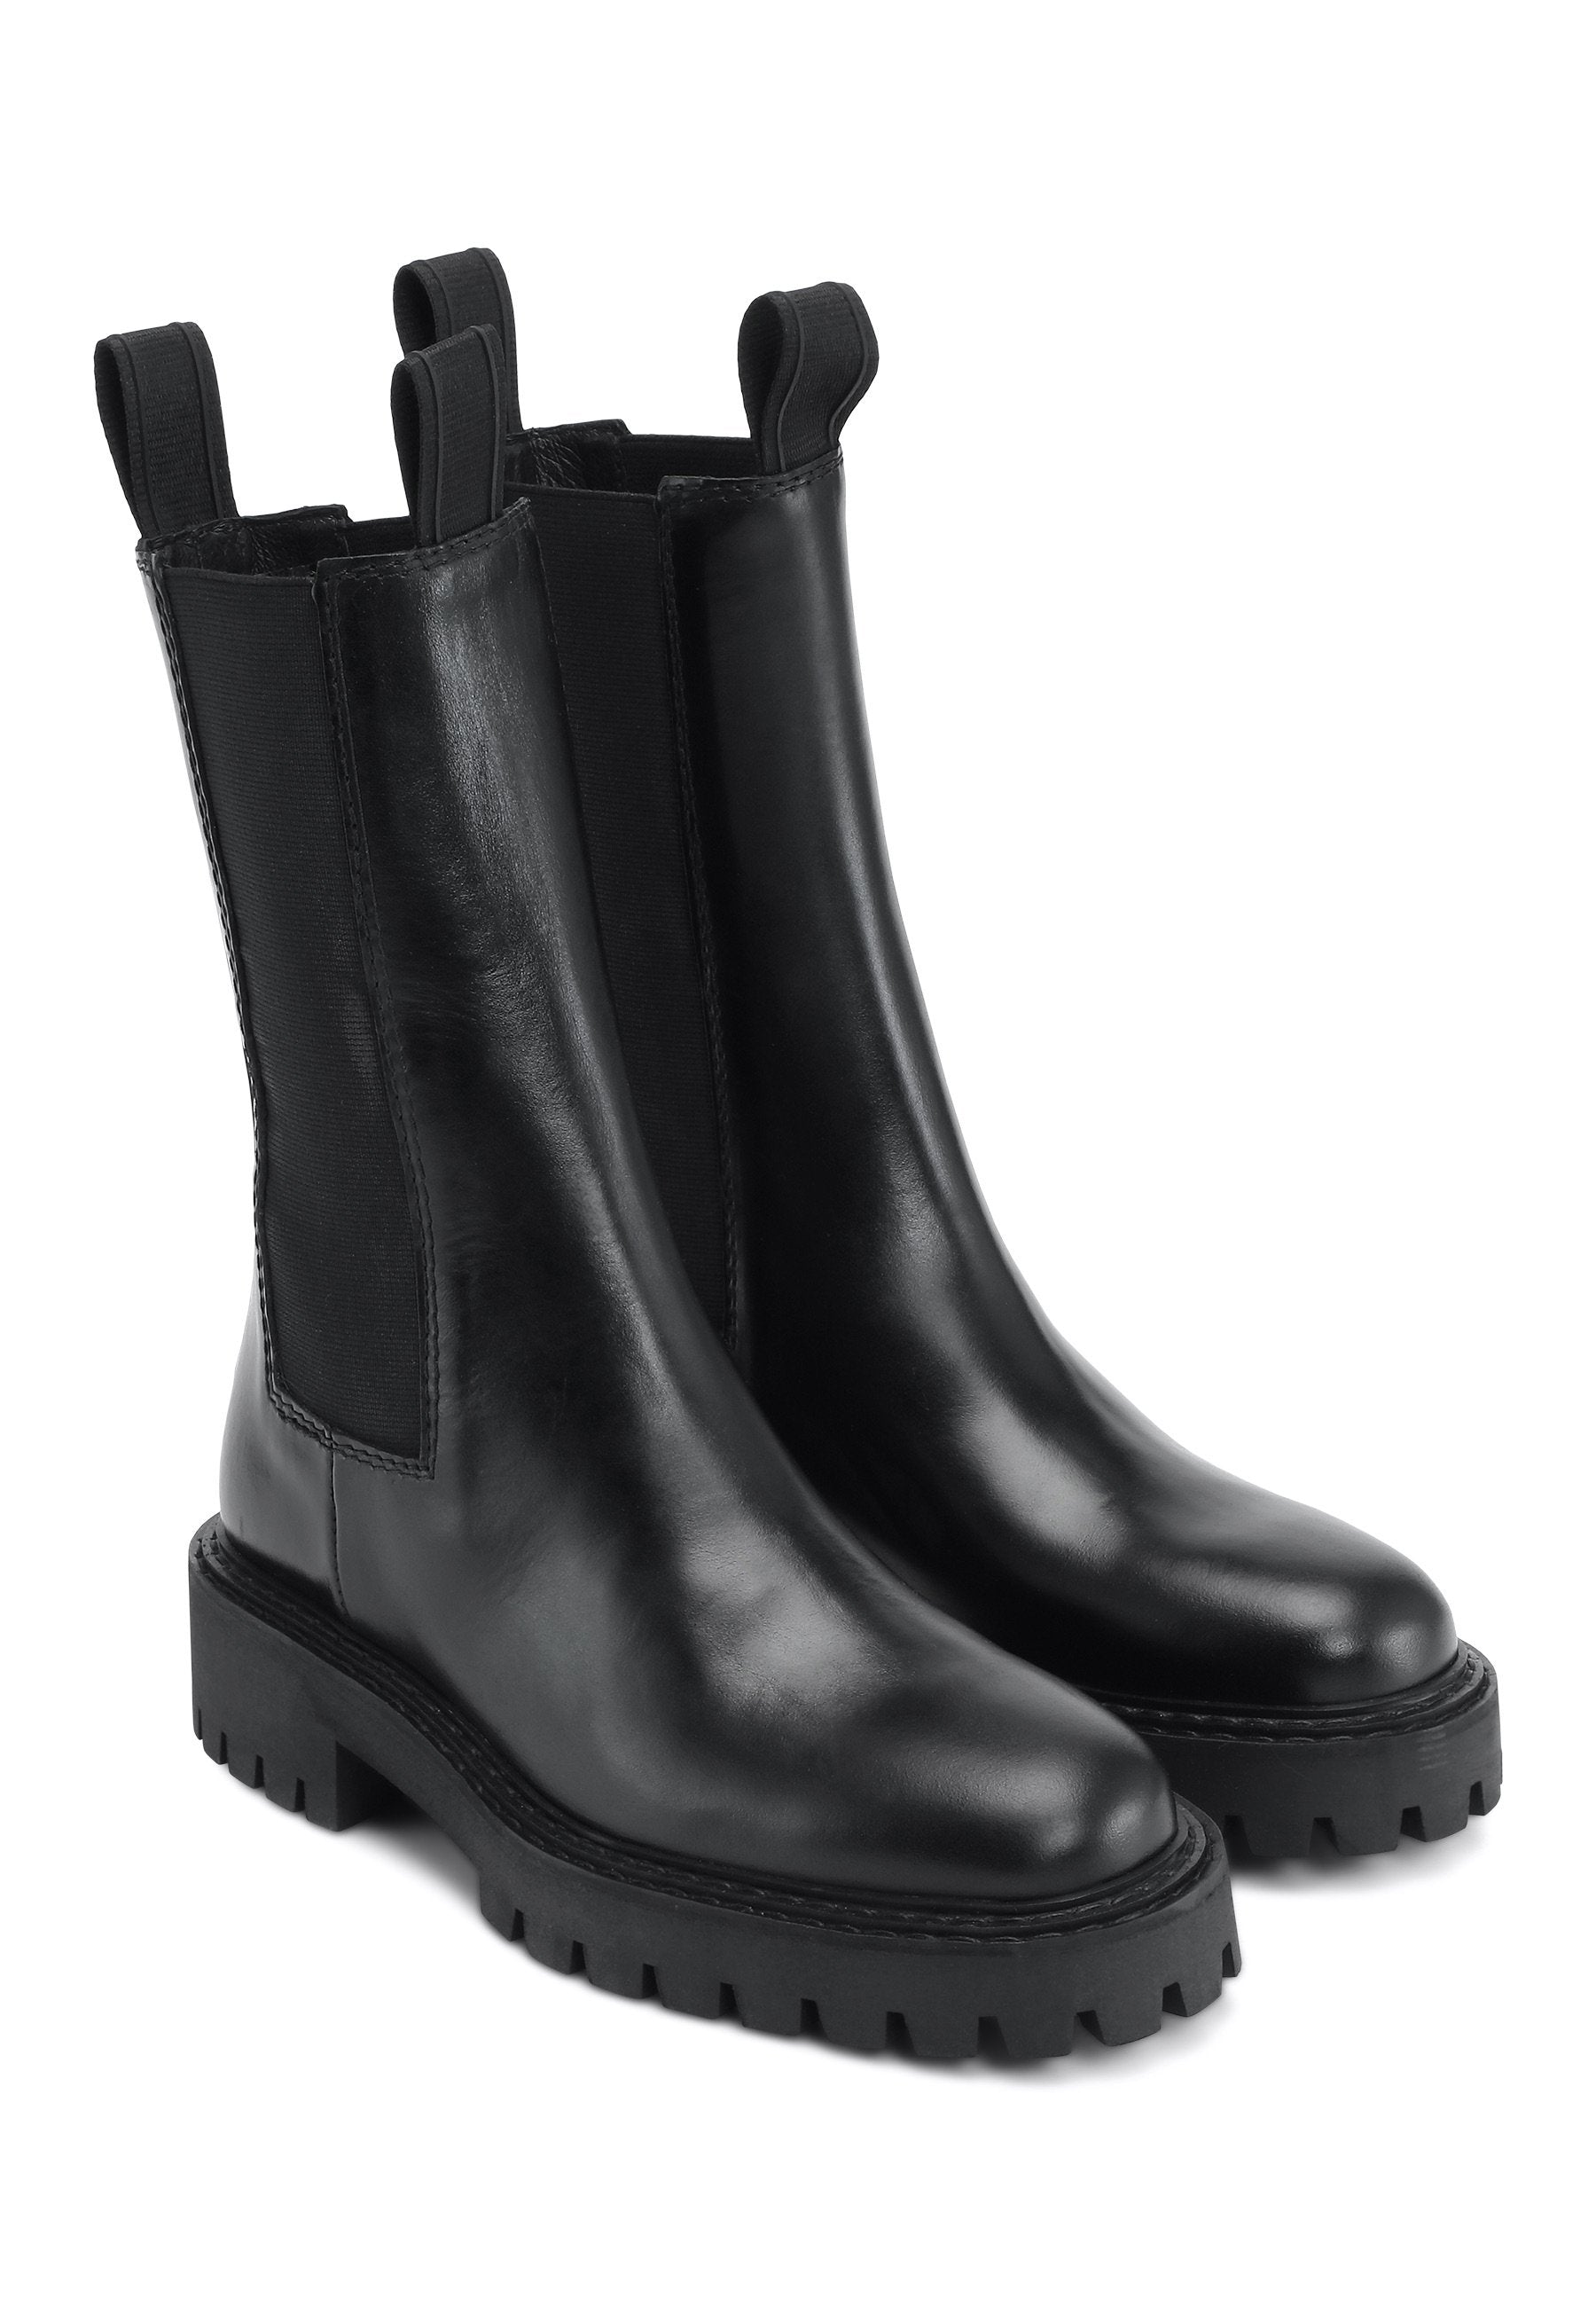 Angie Chelsea Black Boots LAST1127 - 6